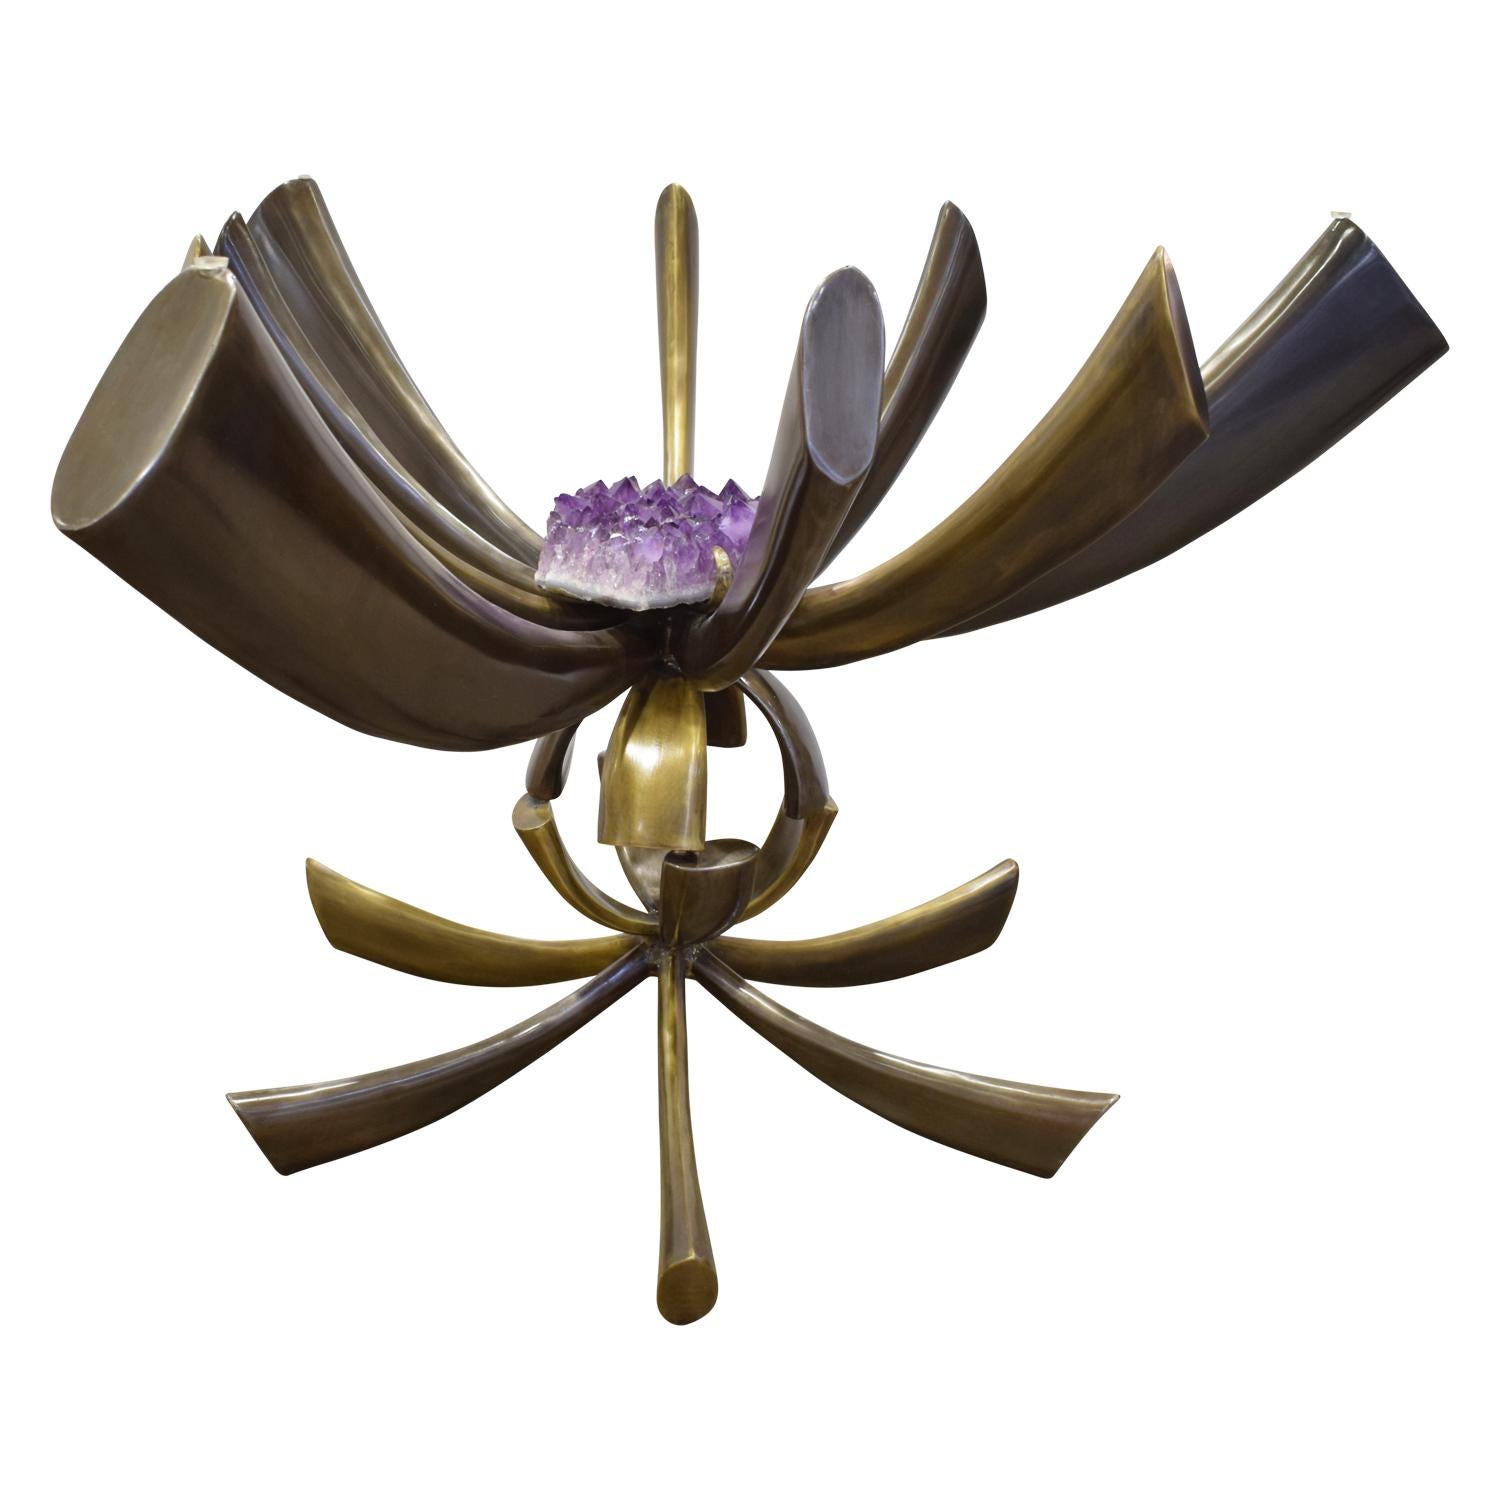 French Jacques Duval-Brasseur Rare Table in Bronze with Mounted Amethyst 1970s 'Signed'